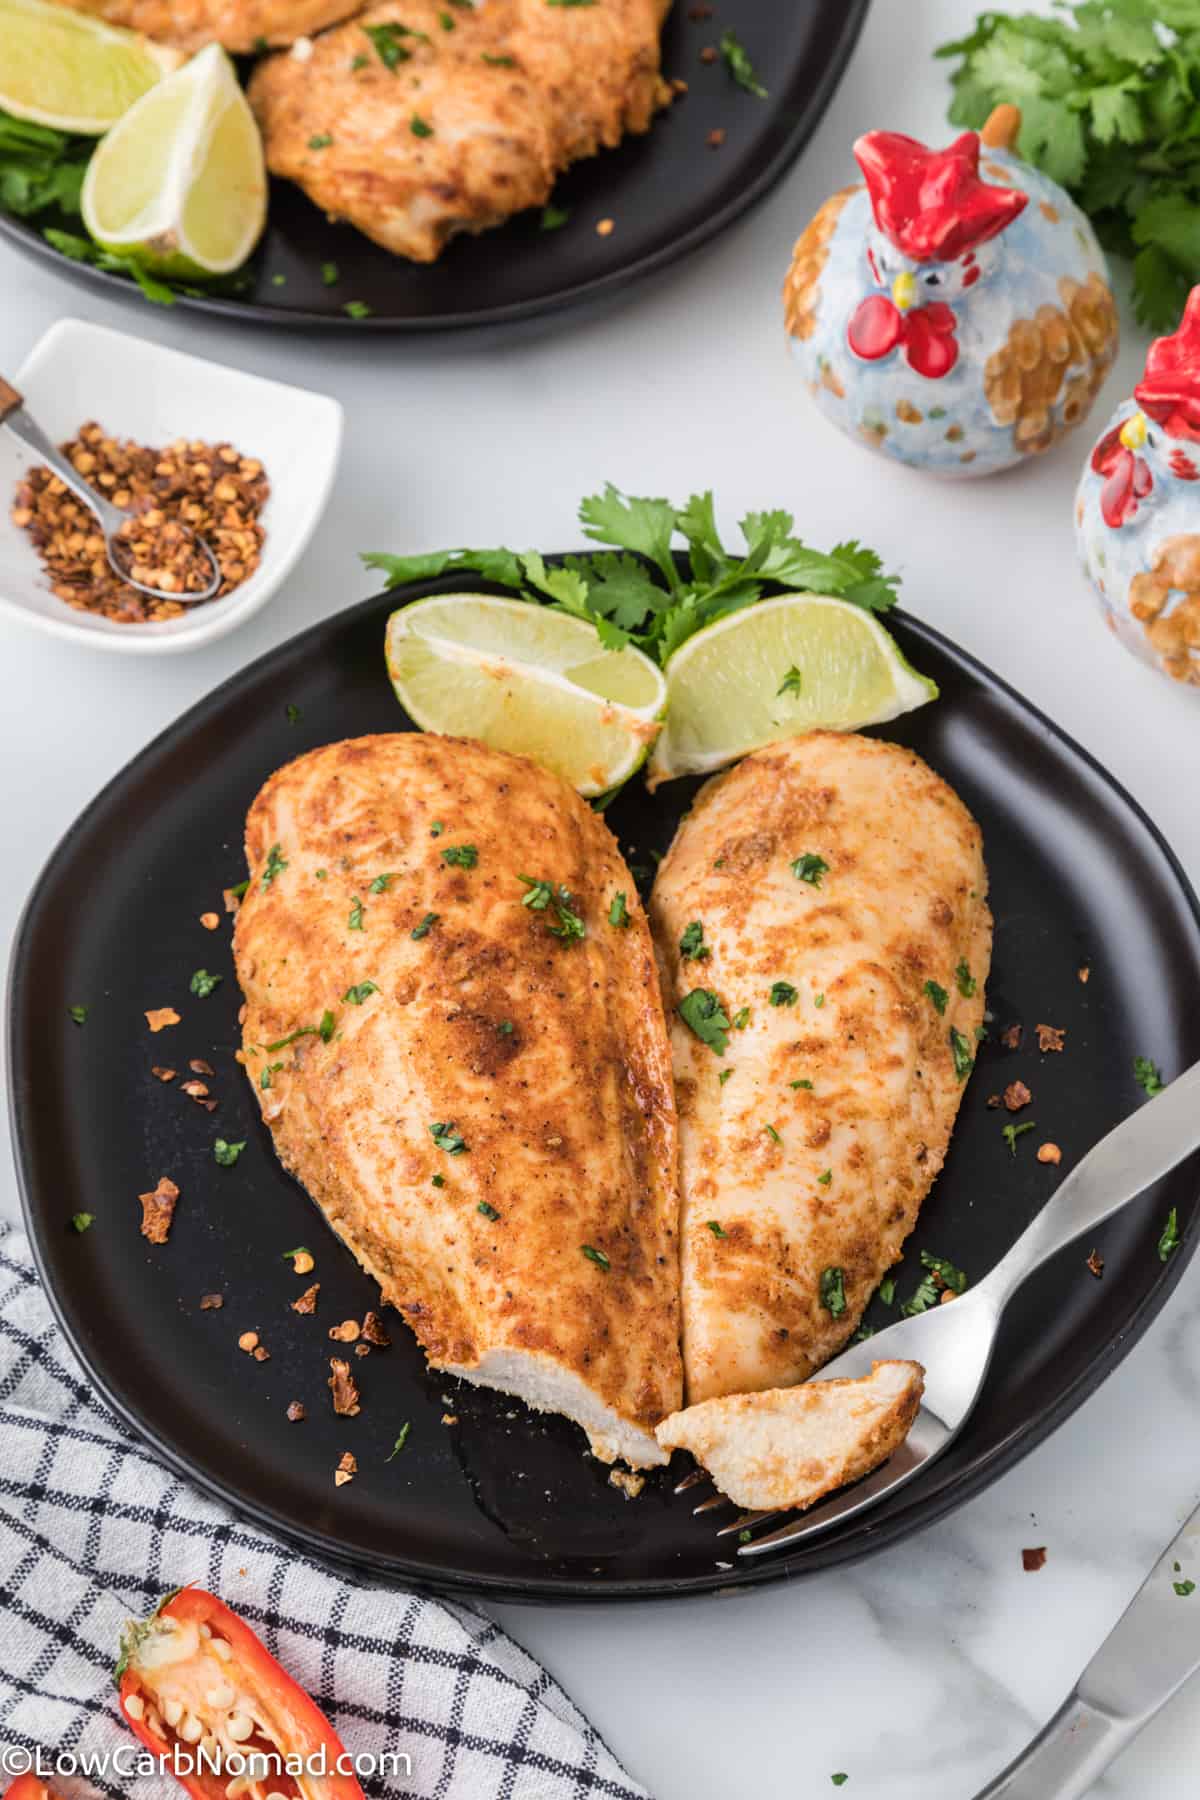 Baked Chili Lime Chicken Recipe close up photo